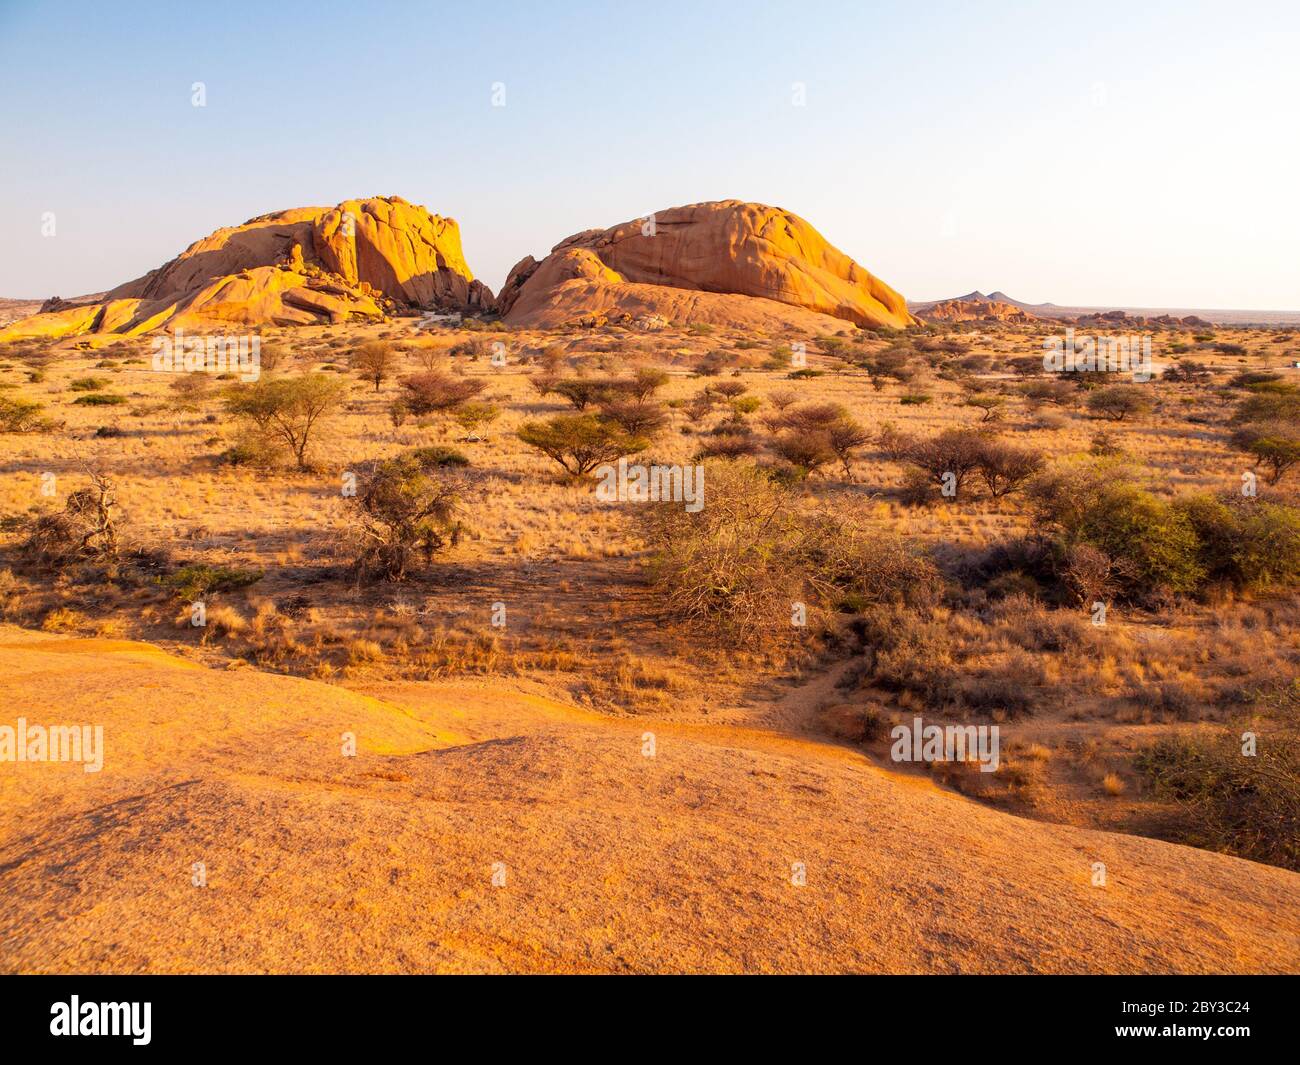 Landscape around Spitzkoppe, aka Spitzkop, with massive granite rock formations, Namib Desert in Namibia, Africa. Stock Photo